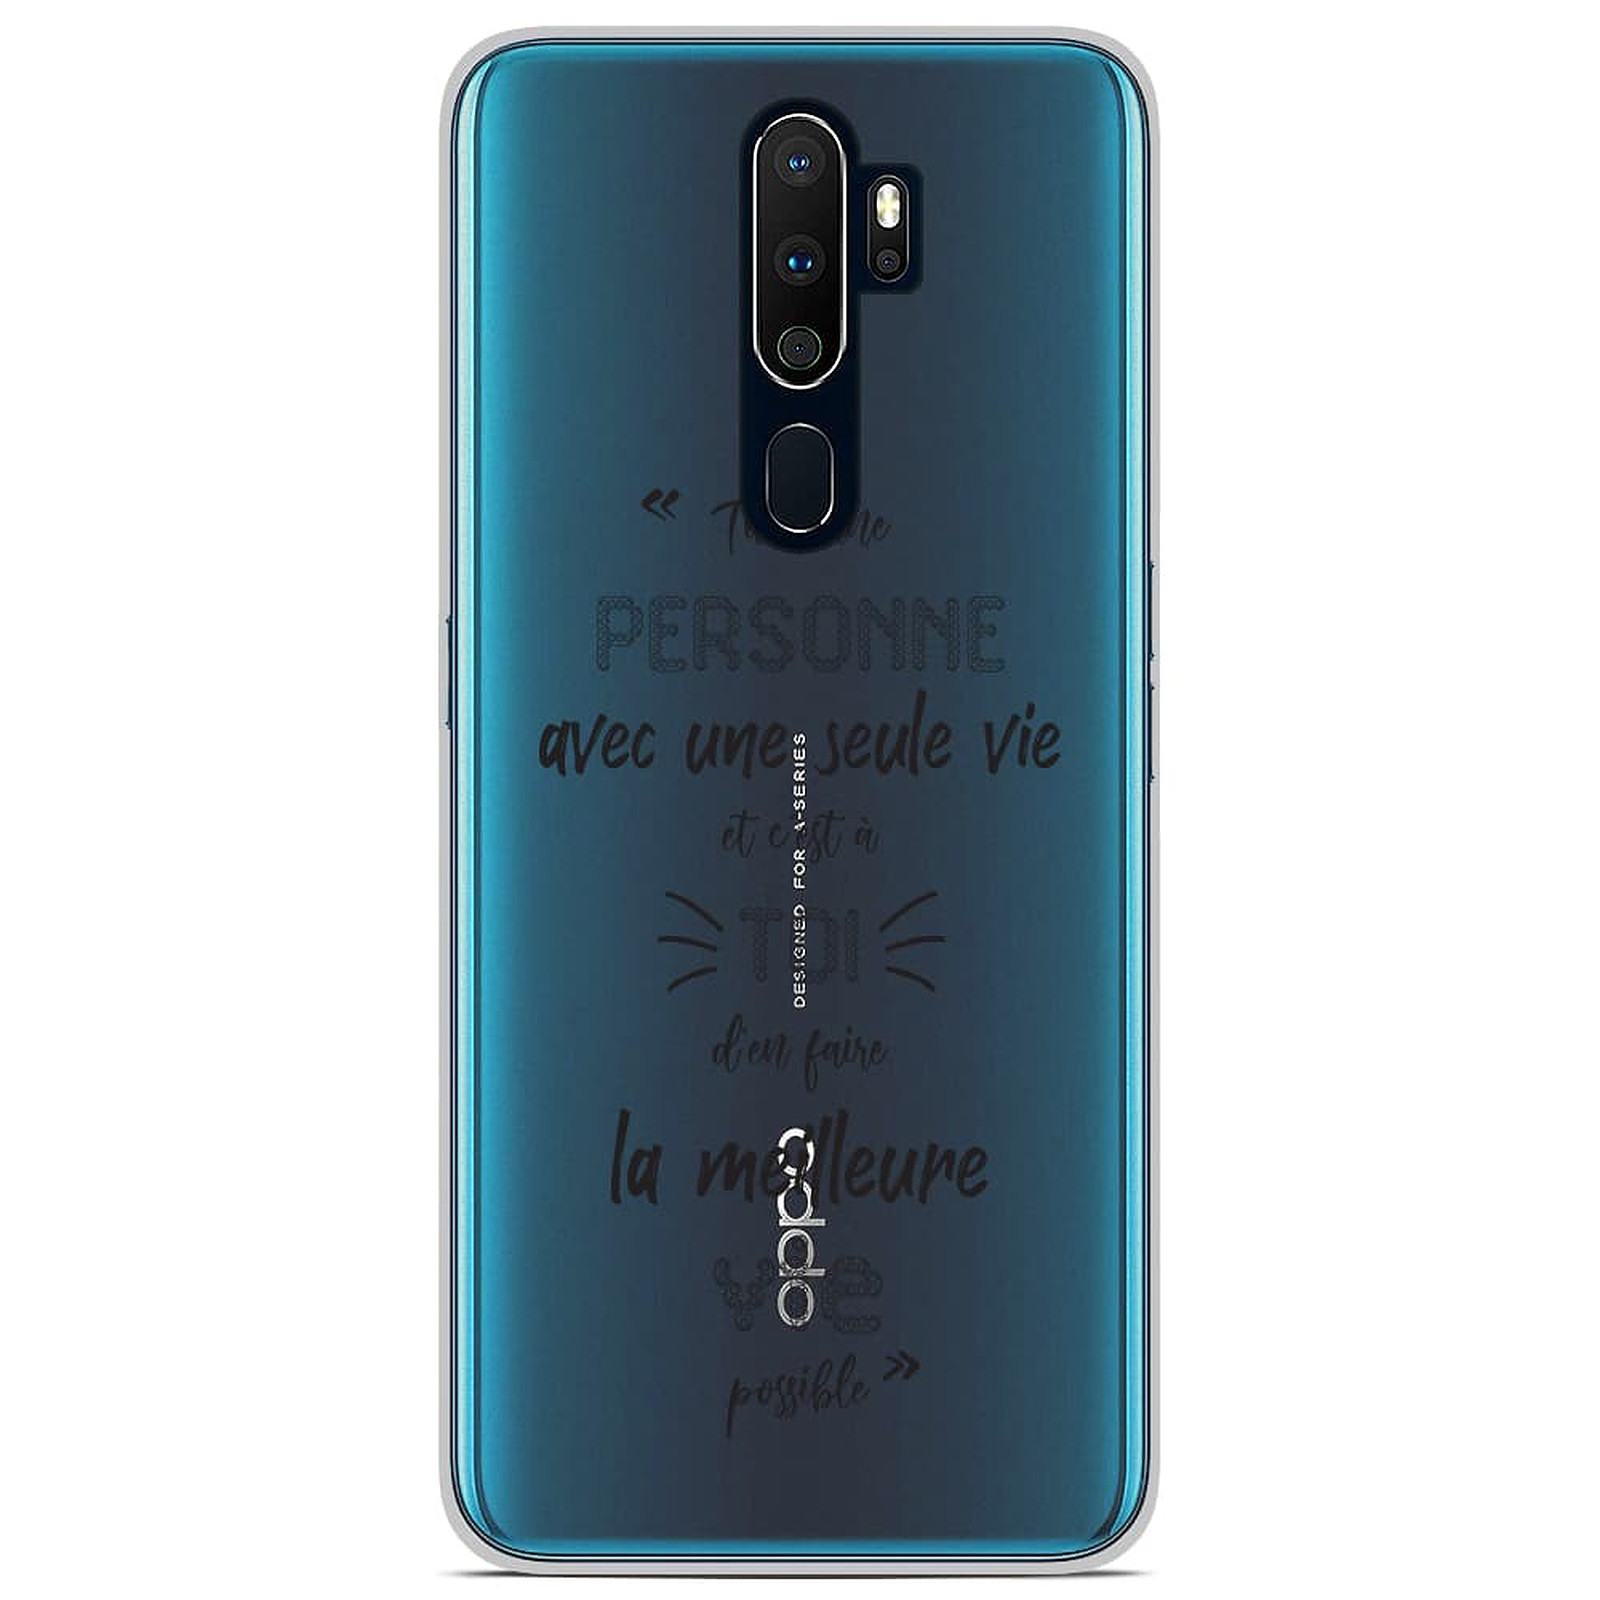 1001 Coques Coque silicone gel Oppo A5 2020 motif Une Seule Vie - Coque telephone 1001Coques